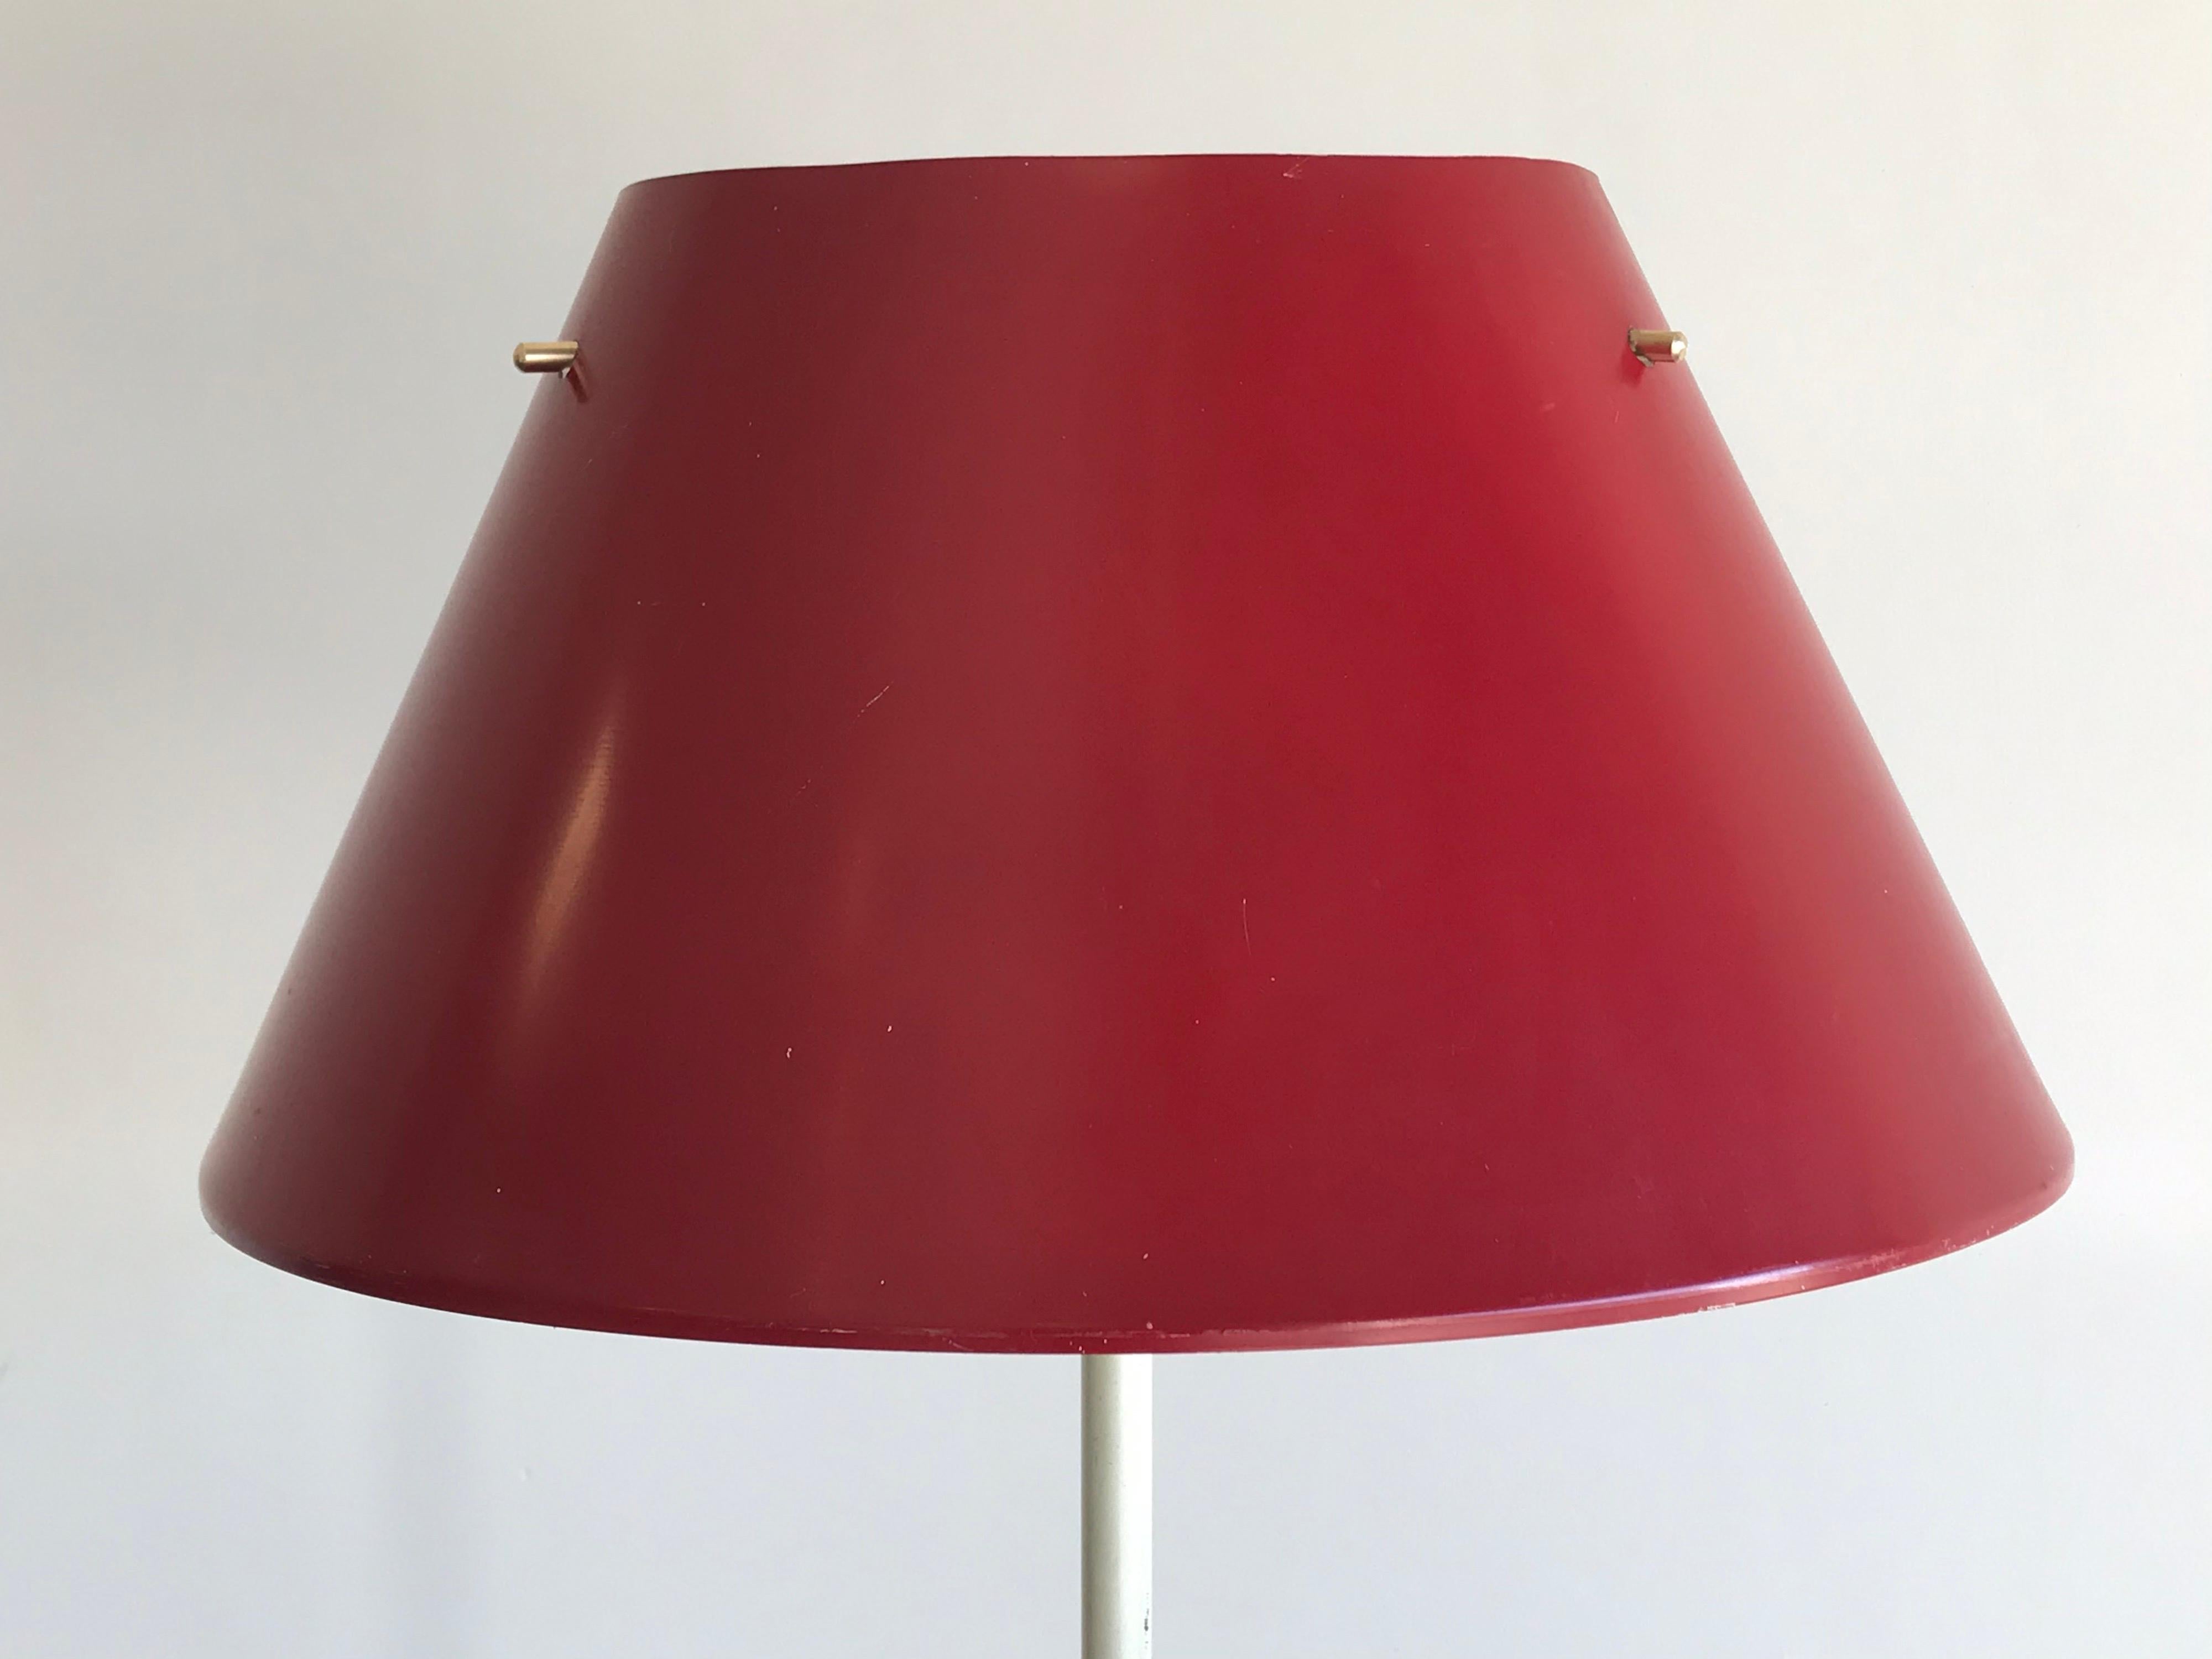 Minimalist floor lamp designed by Hans Agne Jakobsson for Markaryd. Heavy weighted base in white enamel. Floating red enamel shade is supported by three brass pins. Signed both underneath the base and in the shade. 

Wired for US. Takes a standard